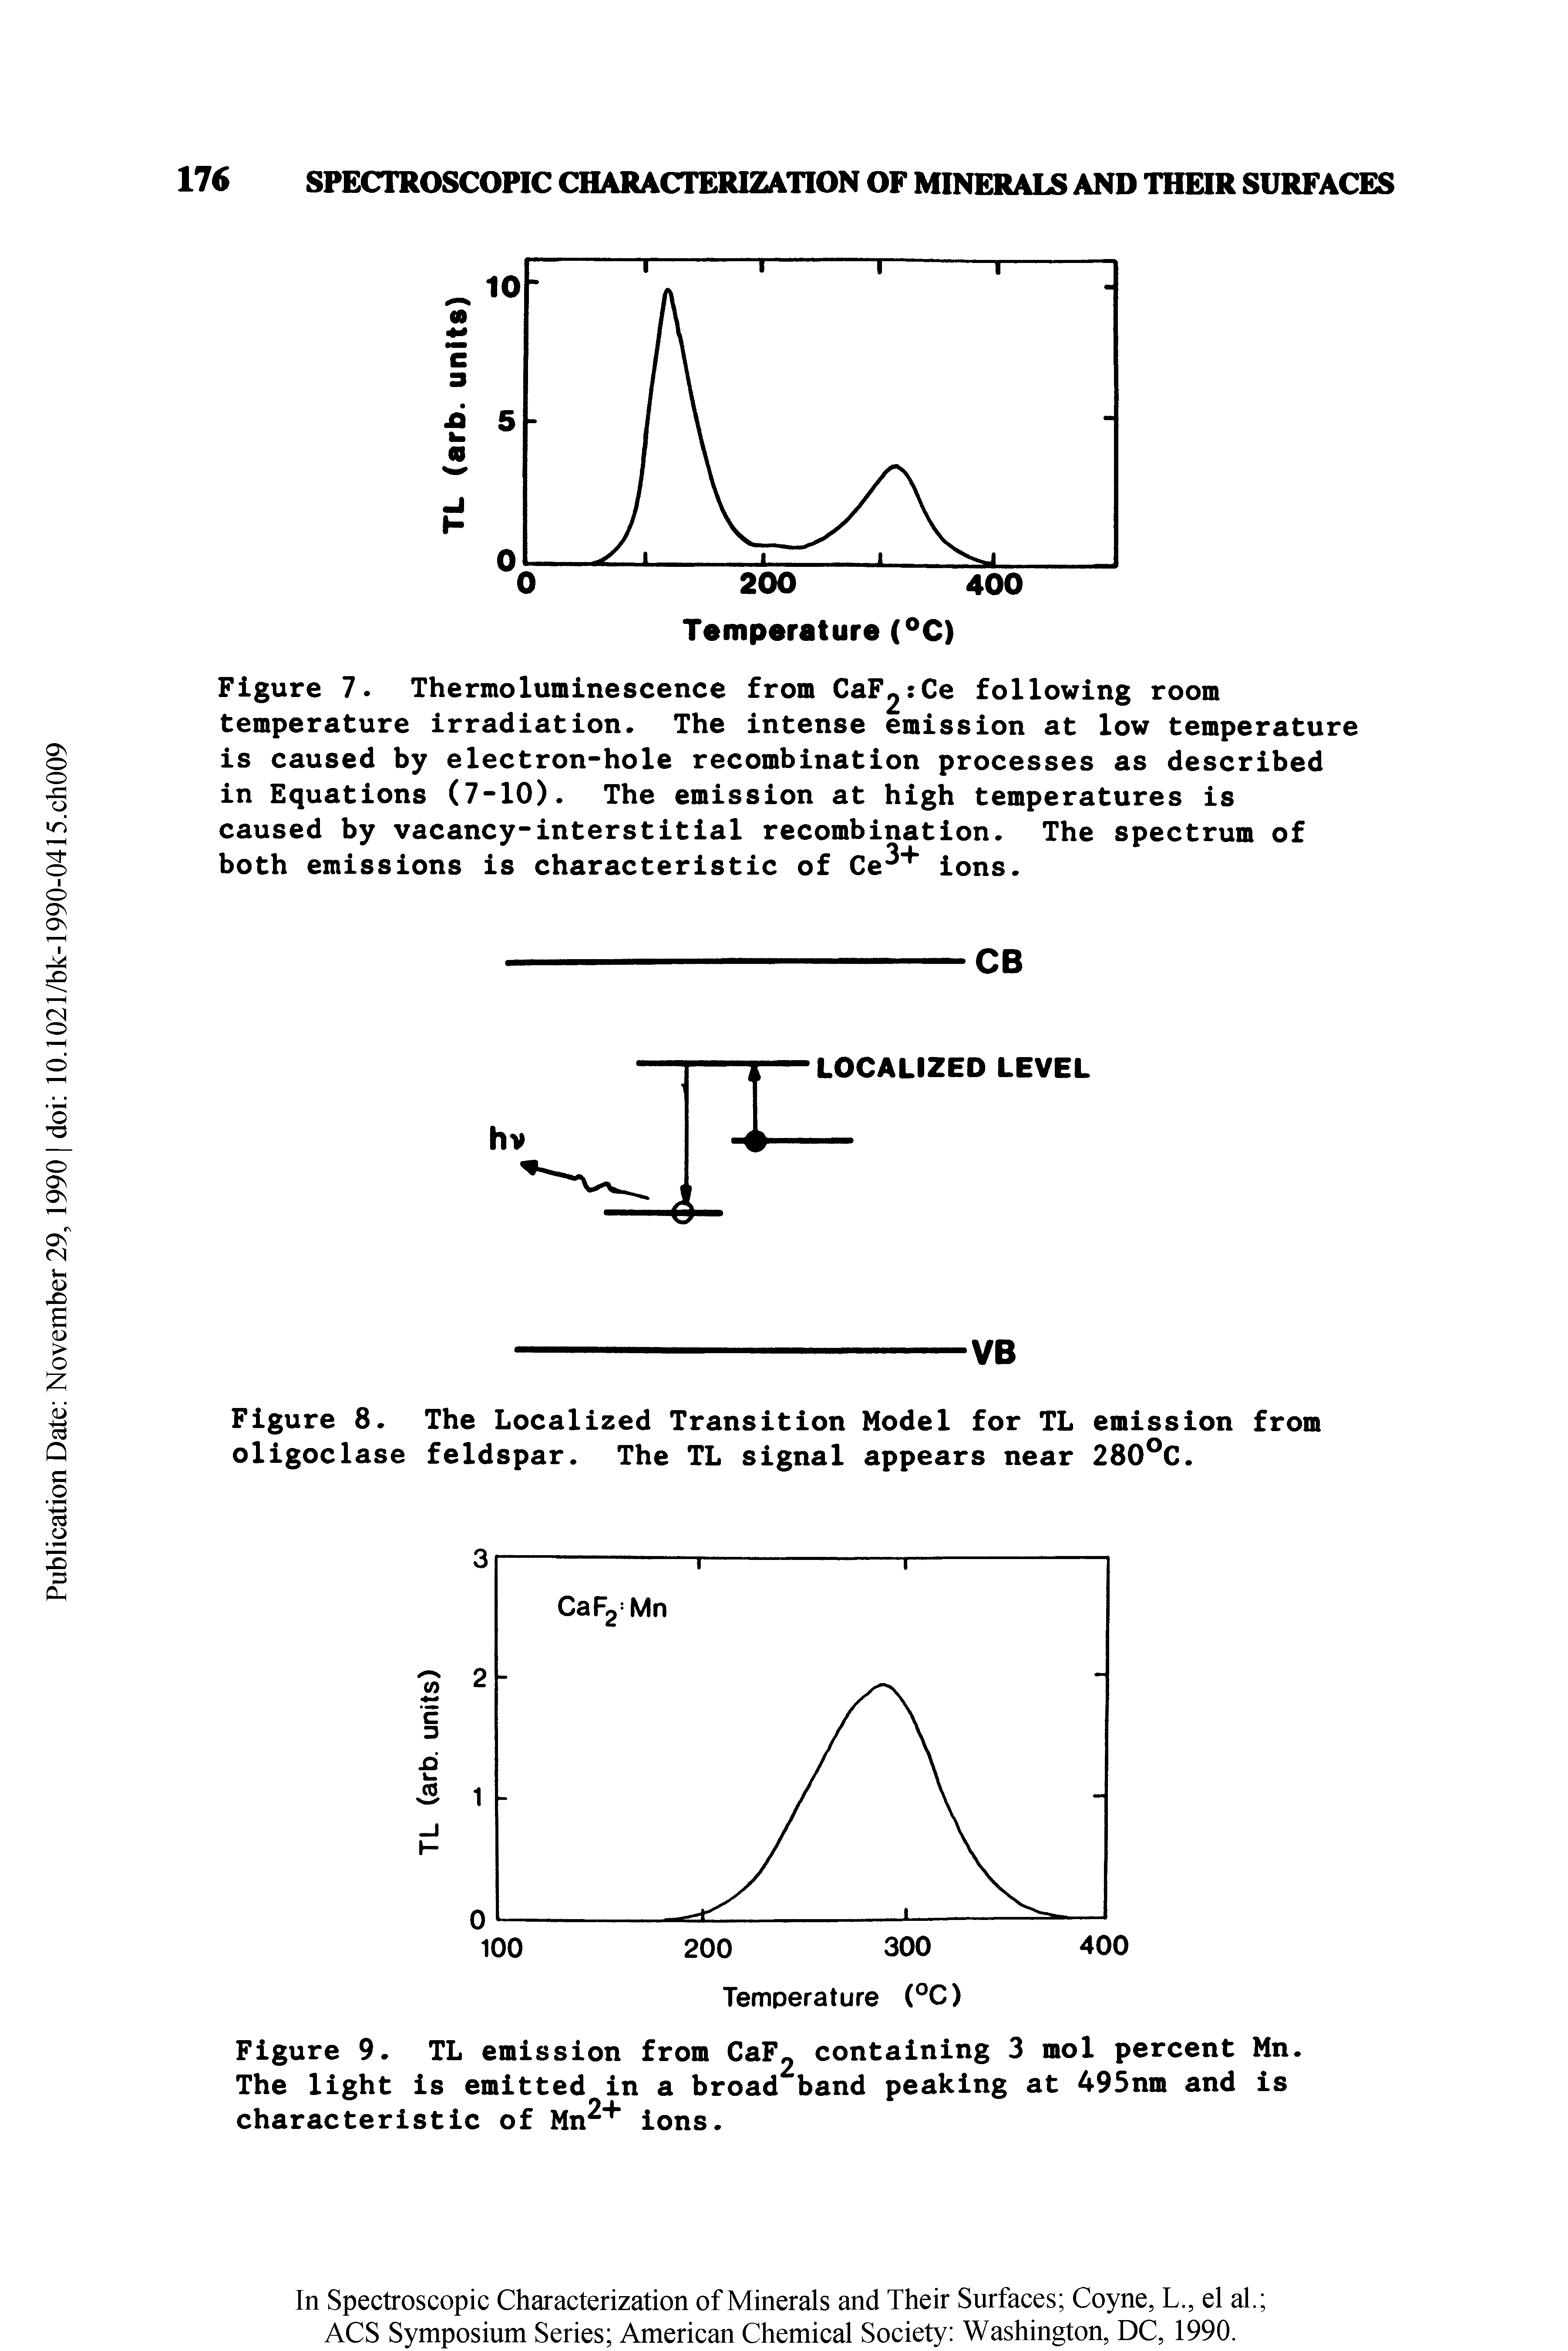 Figure 7. Thermoluminescence from CaF2 Ce following room temperature irradiation. The intense emission at low temperature is caused by electron-hole recombination processes as described in Equations (7-10). The emission at high temperatures is caused by vacancy-interstitial recombination. The spectrum of both emissions is characteristic of Ce + ions.